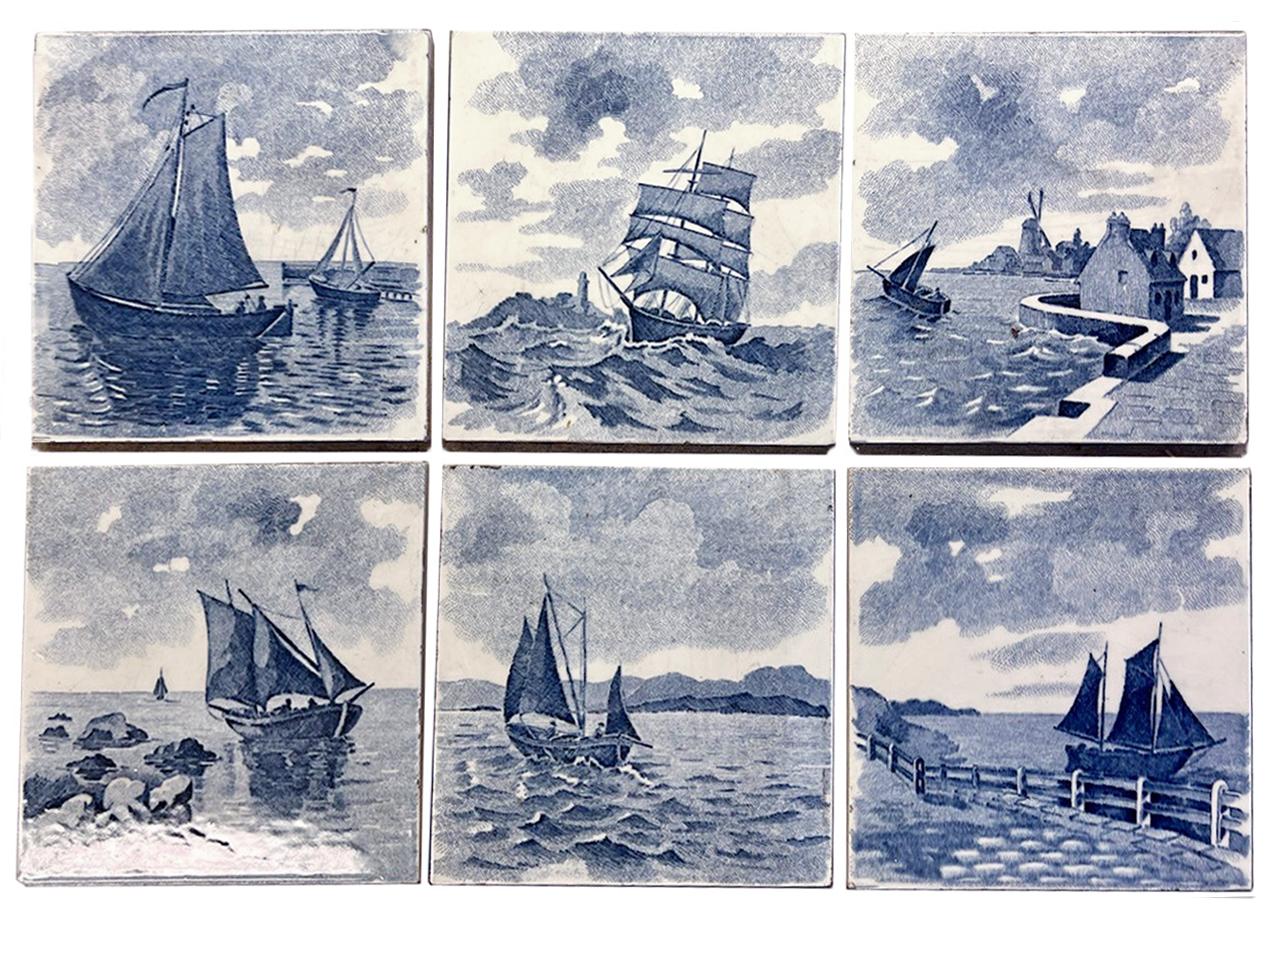 This is an amazing set of dark blue handmade tiles of a Dutch scenery of sailing ships. With 6 different stylized designs. These tiles would be charming displayed on easels, framed or incorporated into a custom tile design.
Please note that the